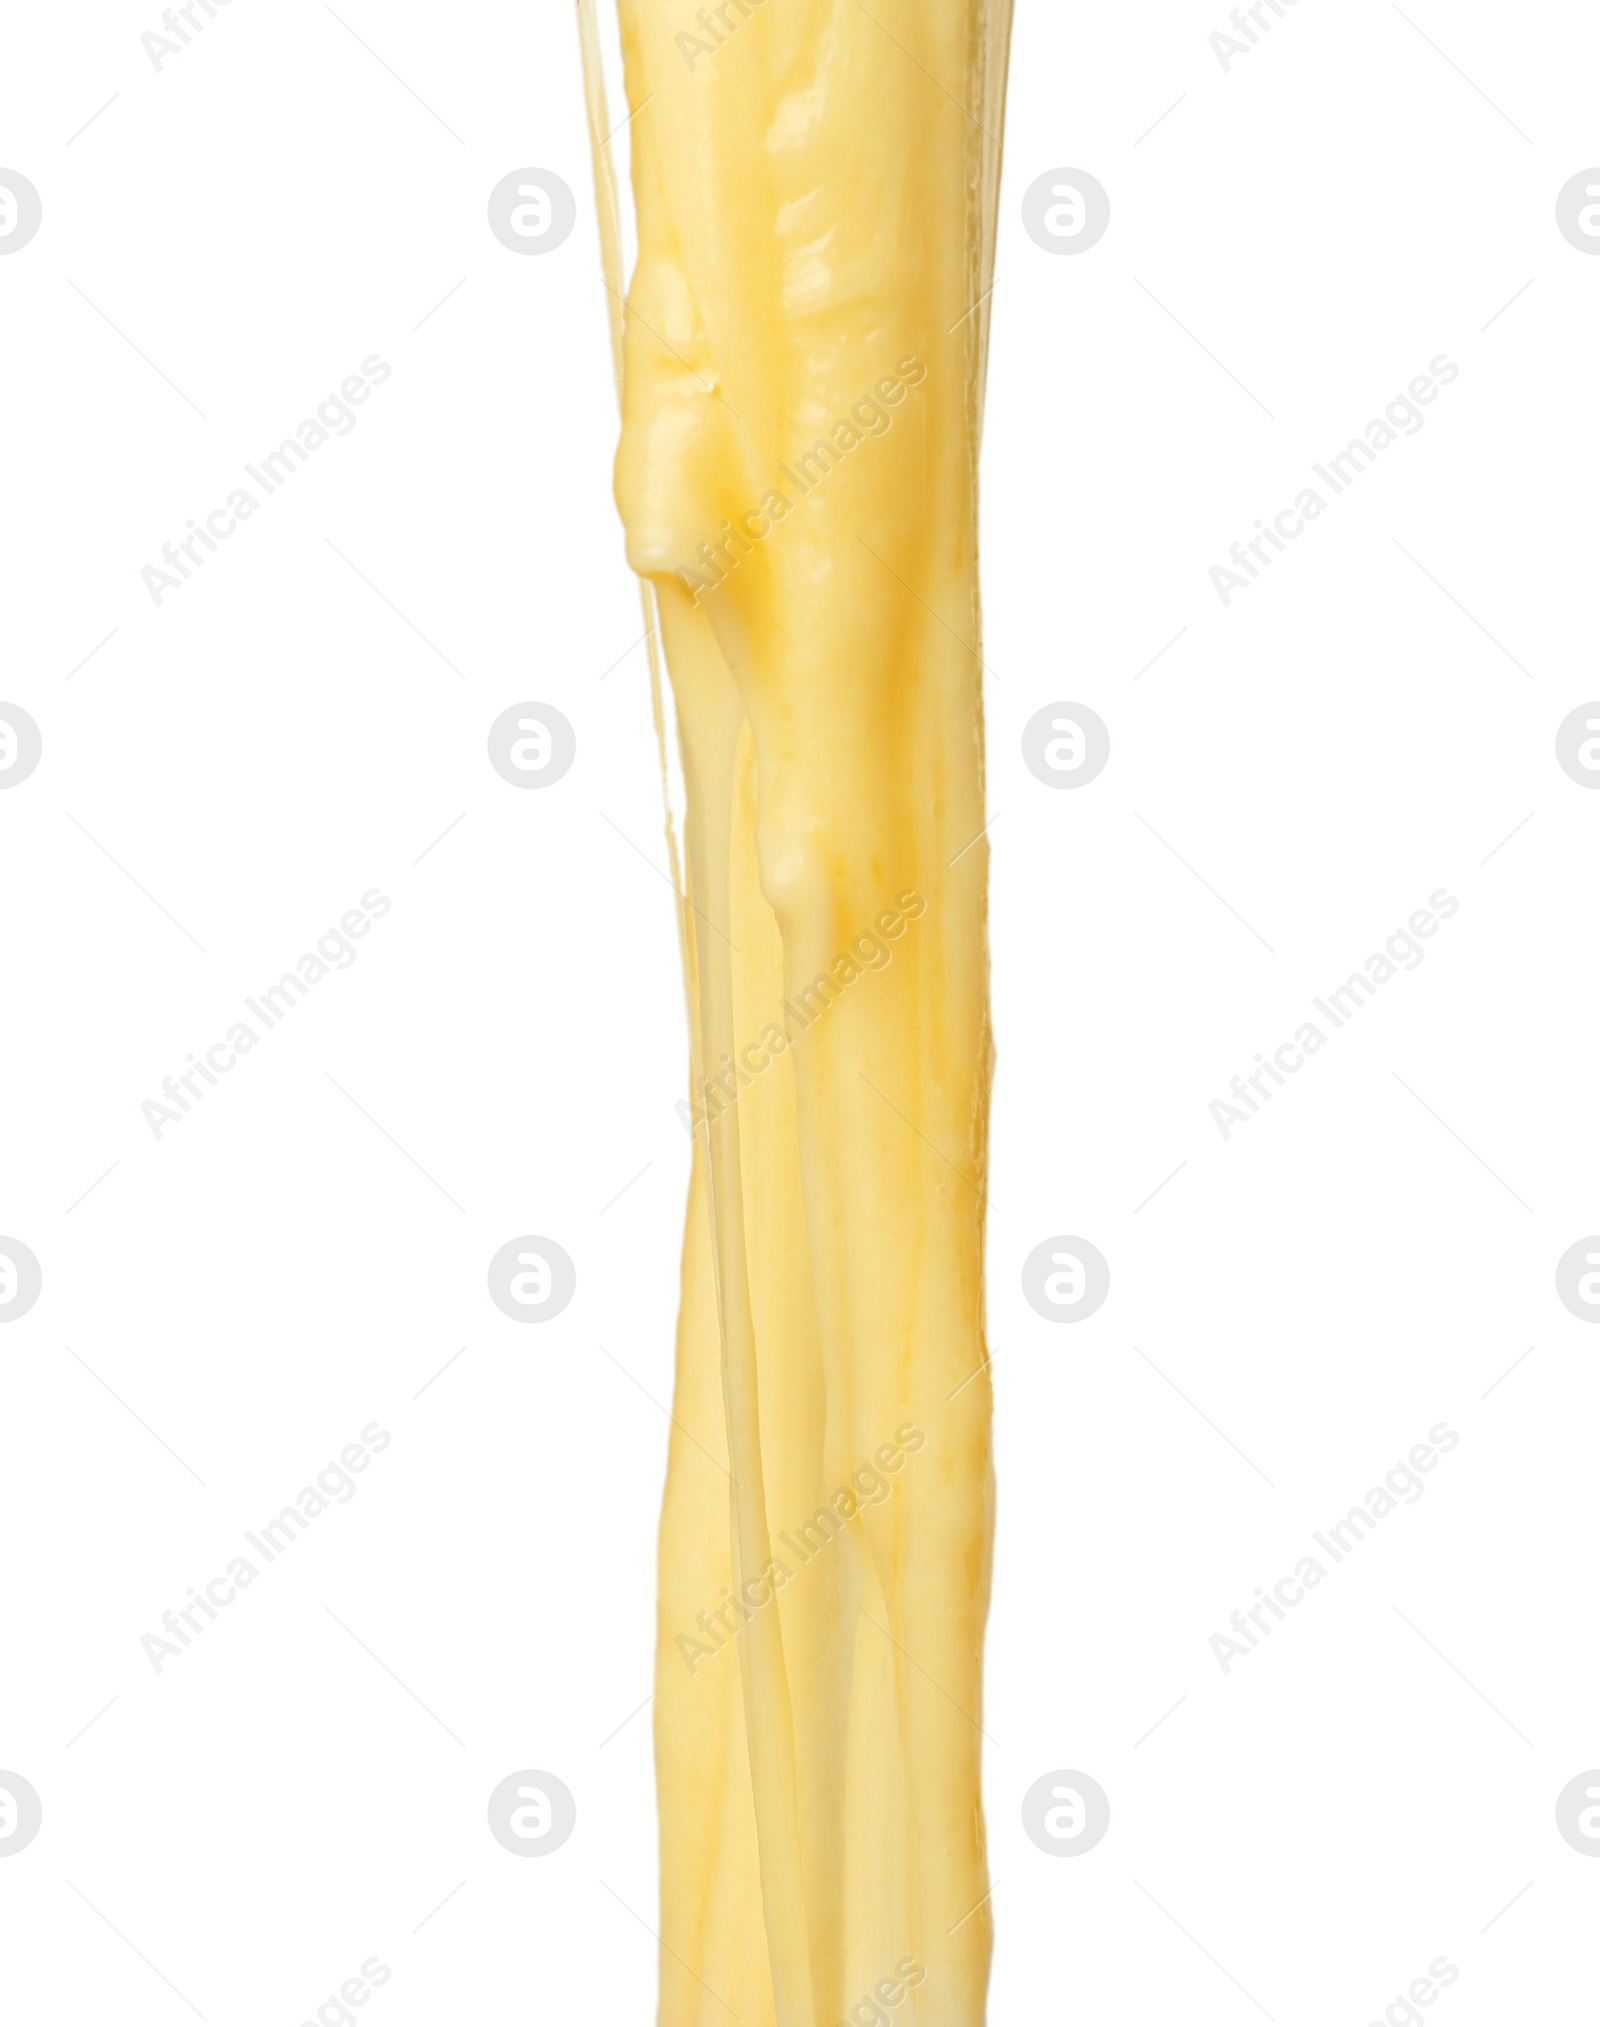 Photo of Stretching delicious melted cheese isolated on white